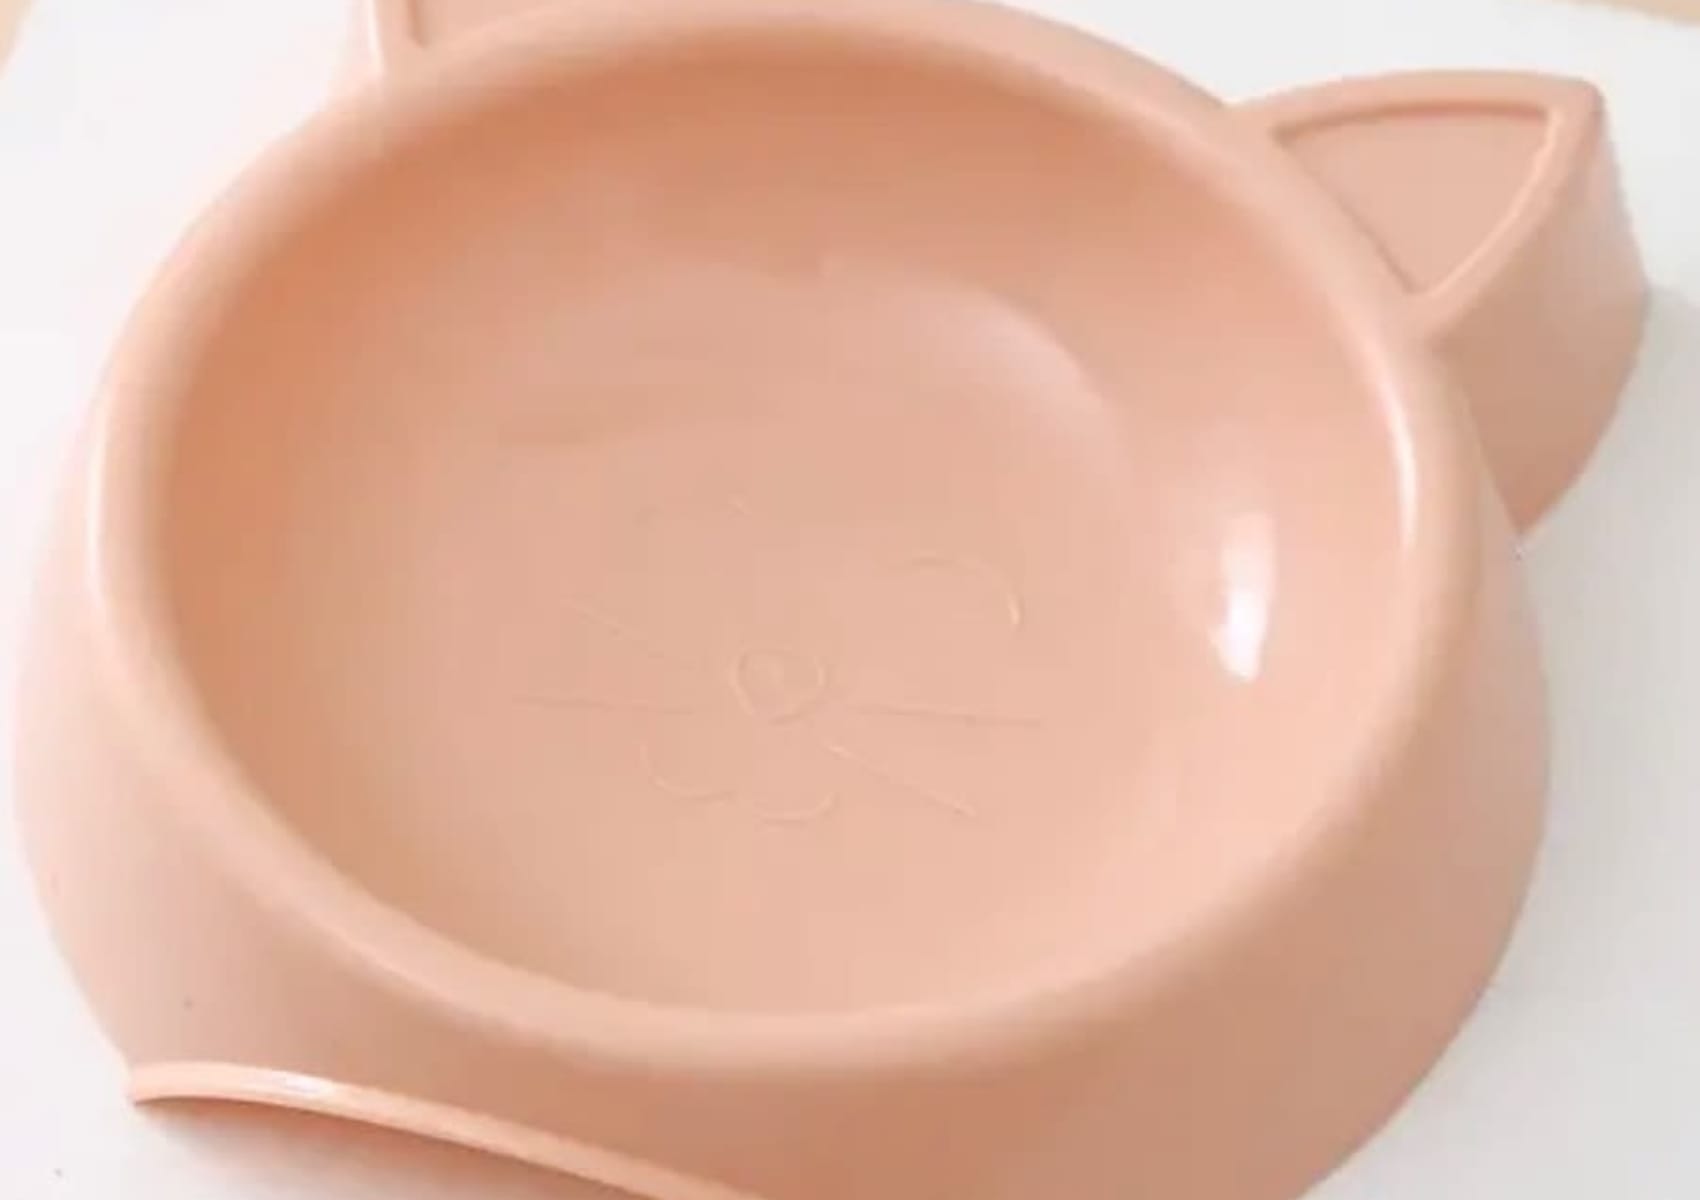 Pink cat shaped food or water bowl with cat face